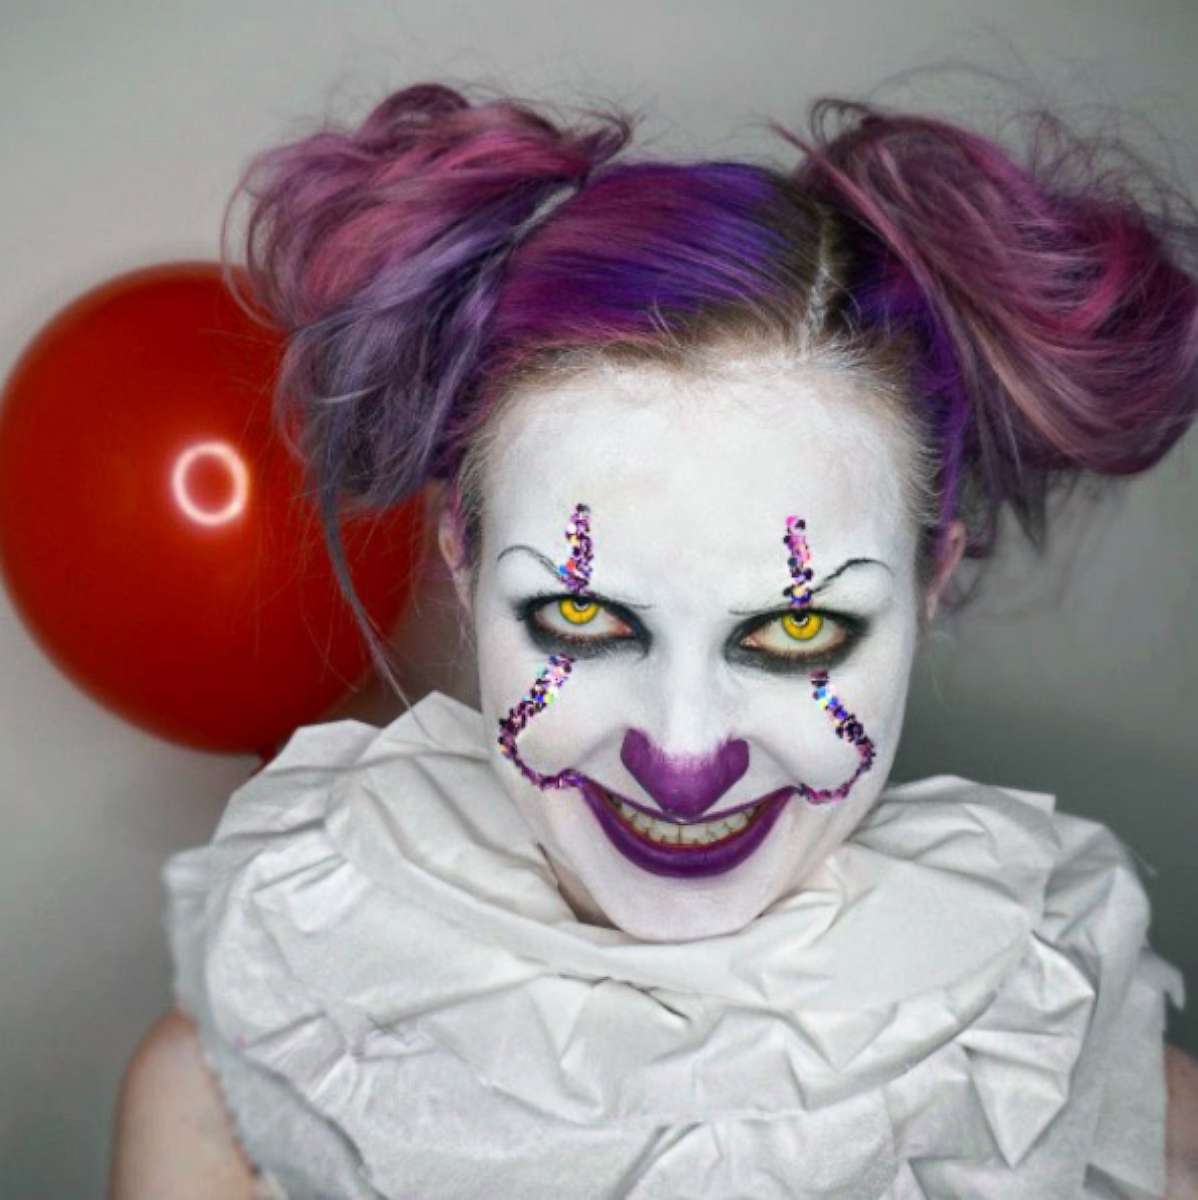 PHOTO: Makeup artist Tonje Tiana Neteland of Norway shares her Halloween makeup design on Instagram for Pennywise the clown from the 2017 horror film, "It."